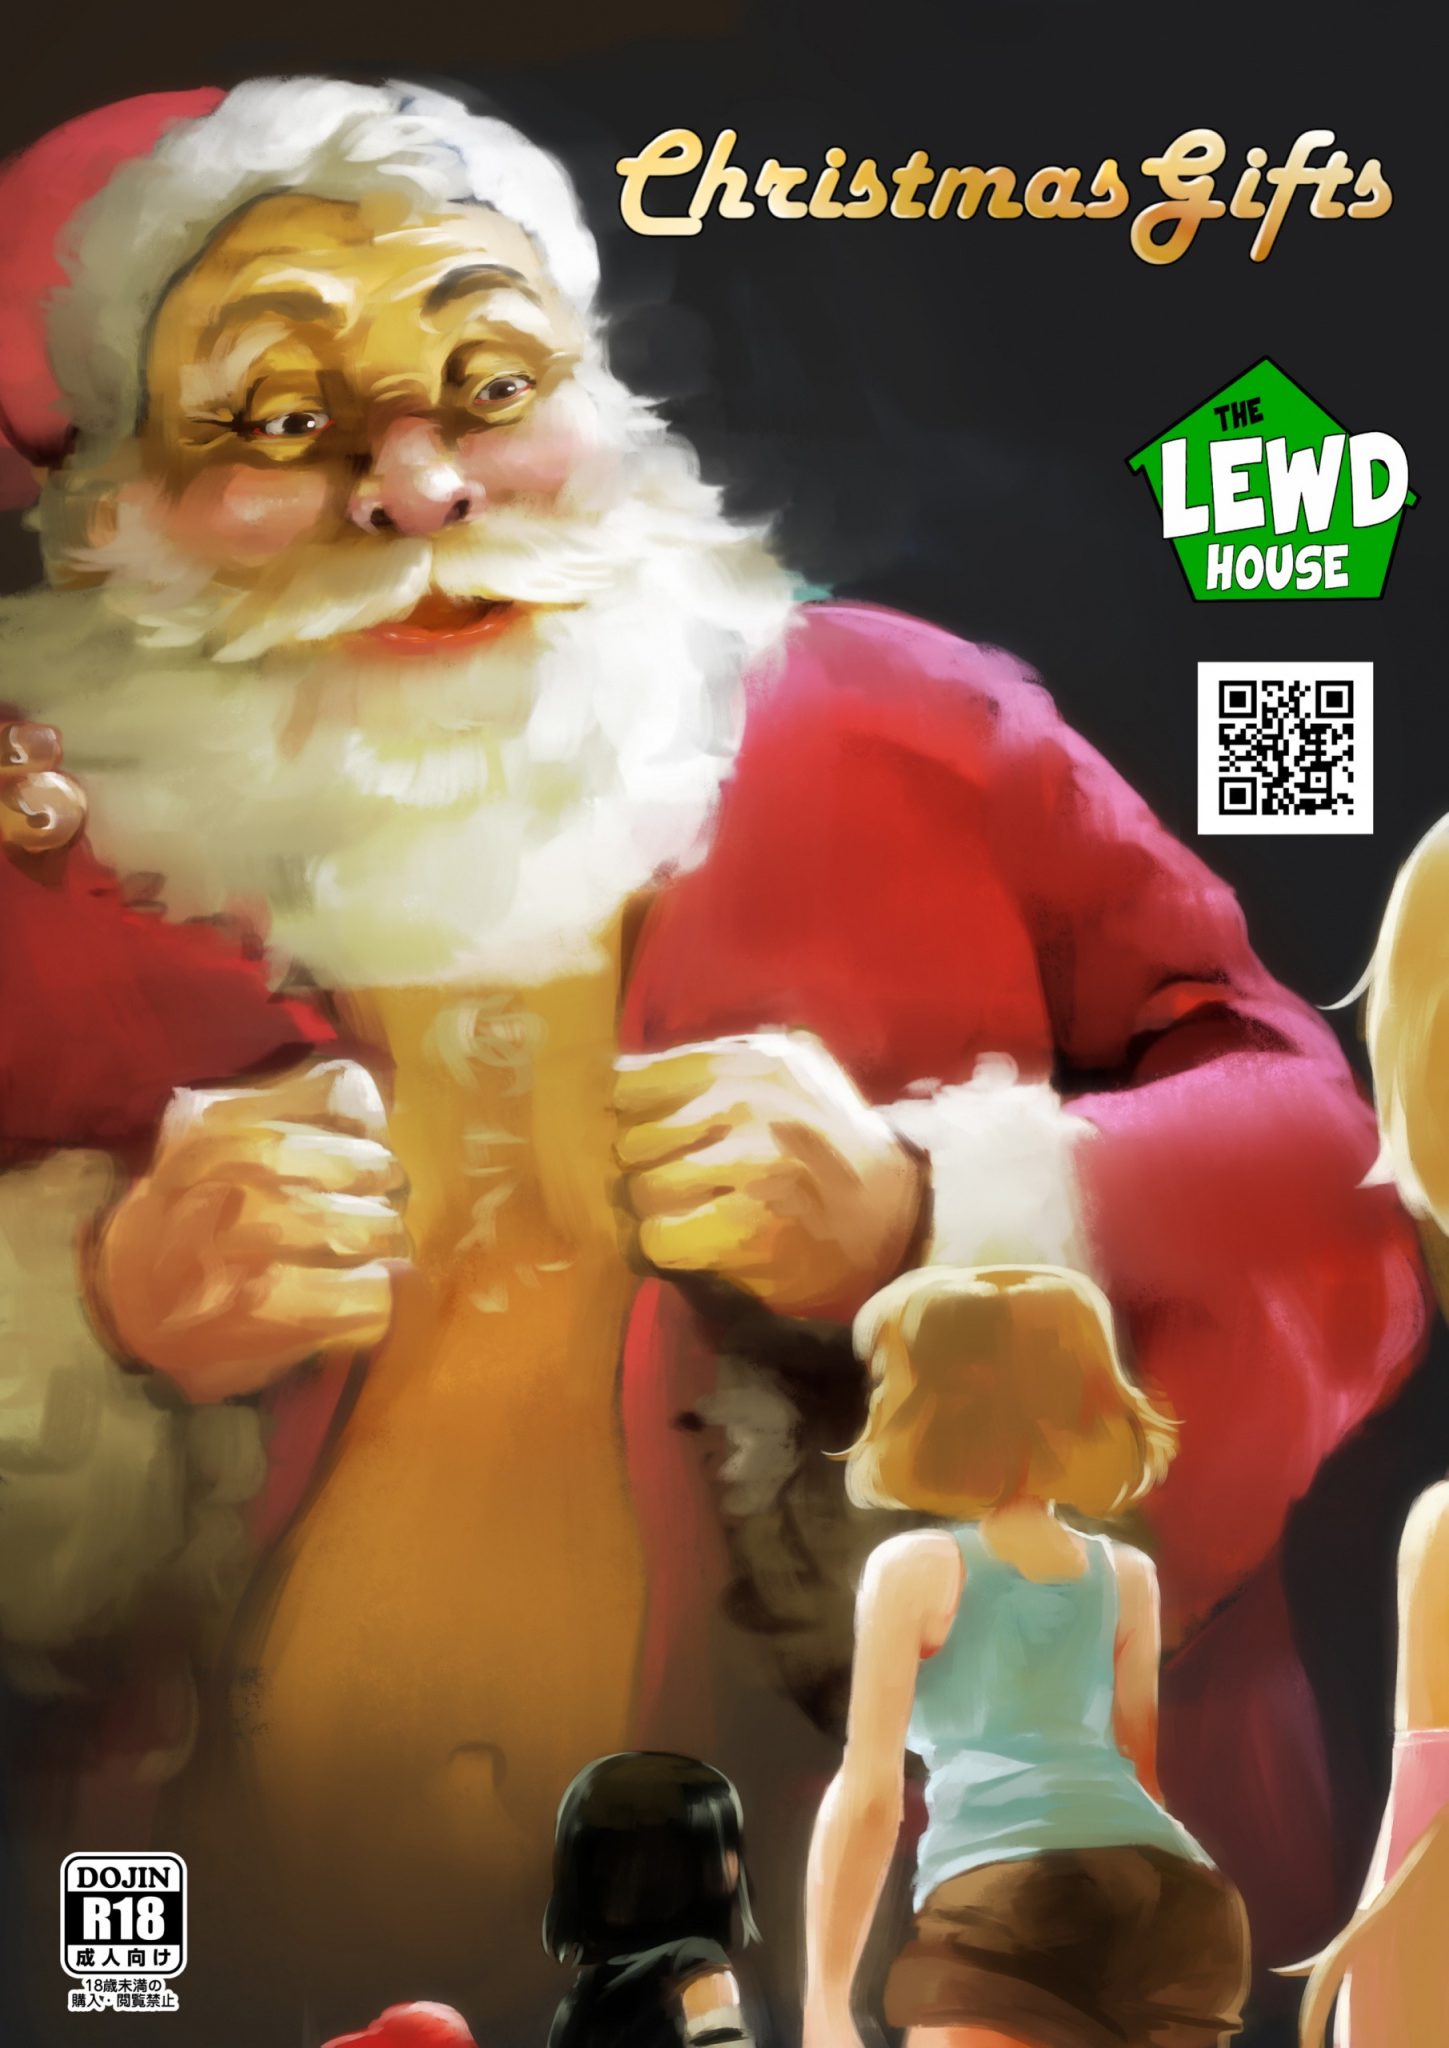 The Lewd House 2.5: Christmas Gifts